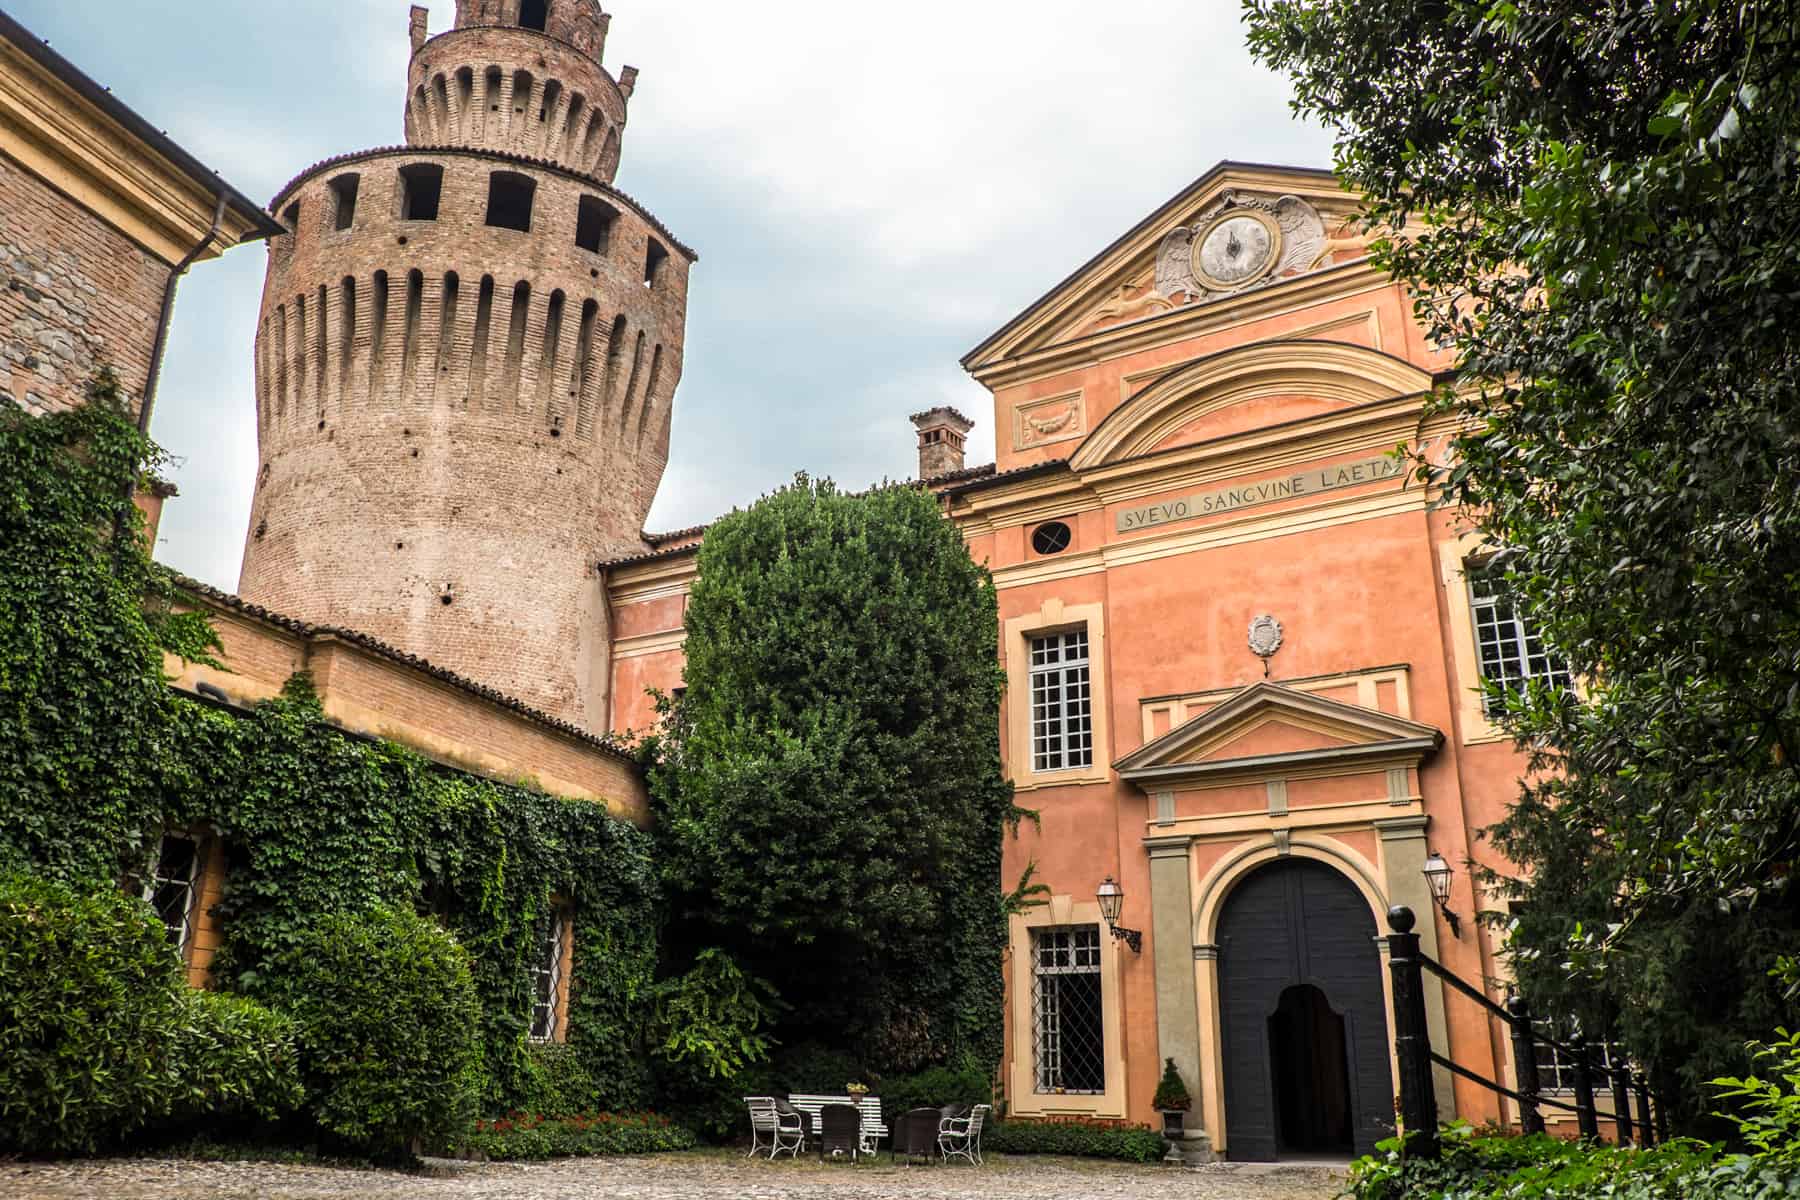 A triangular roofed orange manor house building that connects with a medieval stone castle tower in Piacenza, Italy. 